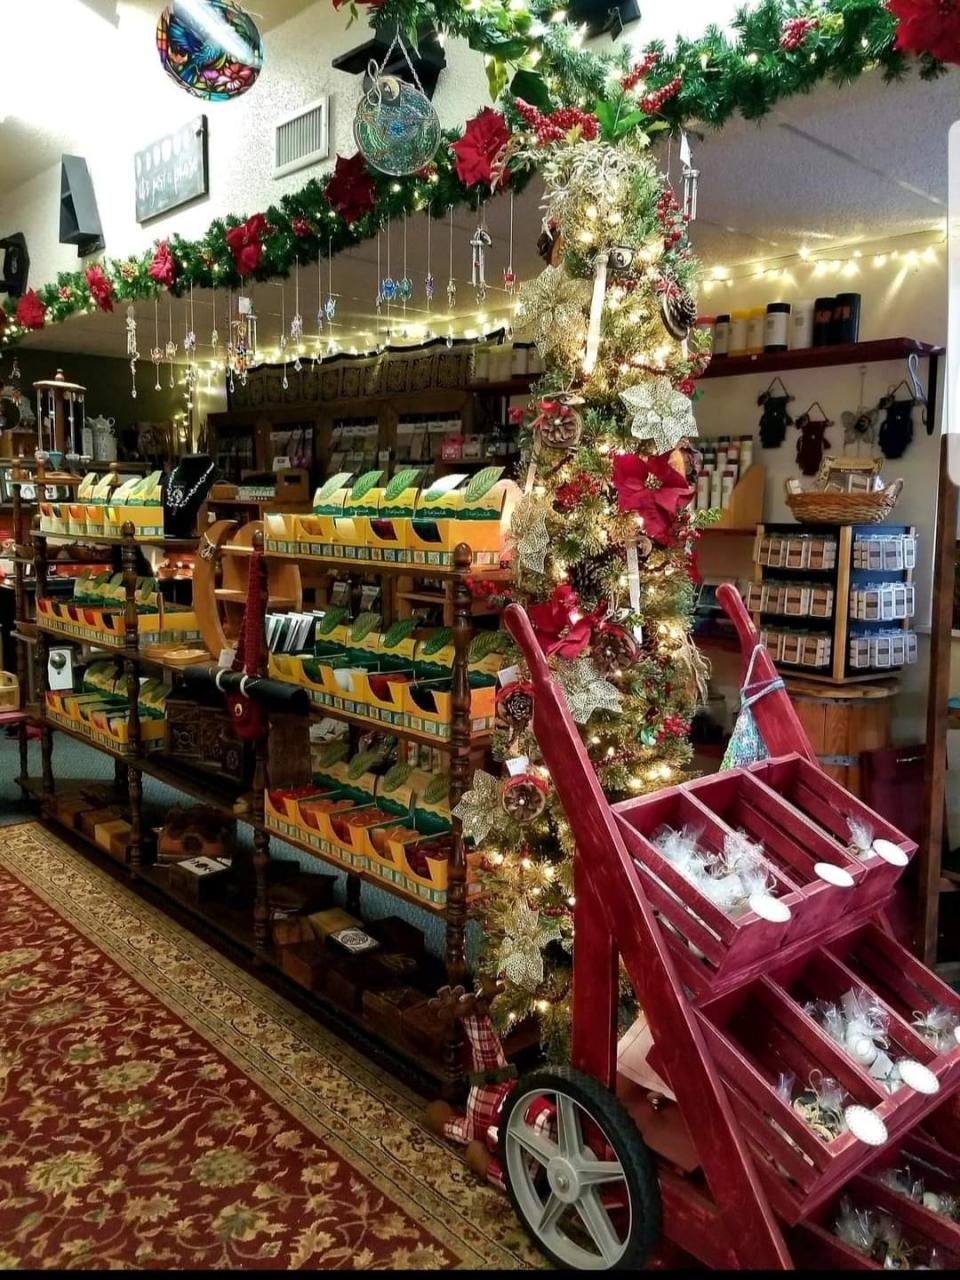 Gypsie Hollow, 2001 S. Central Ave. in Marshfield, offers a variety of plant-based and natural home and bath products, ethically sourced gems and minerals and handcrafted jewelry perfect for holiday gift-giving.